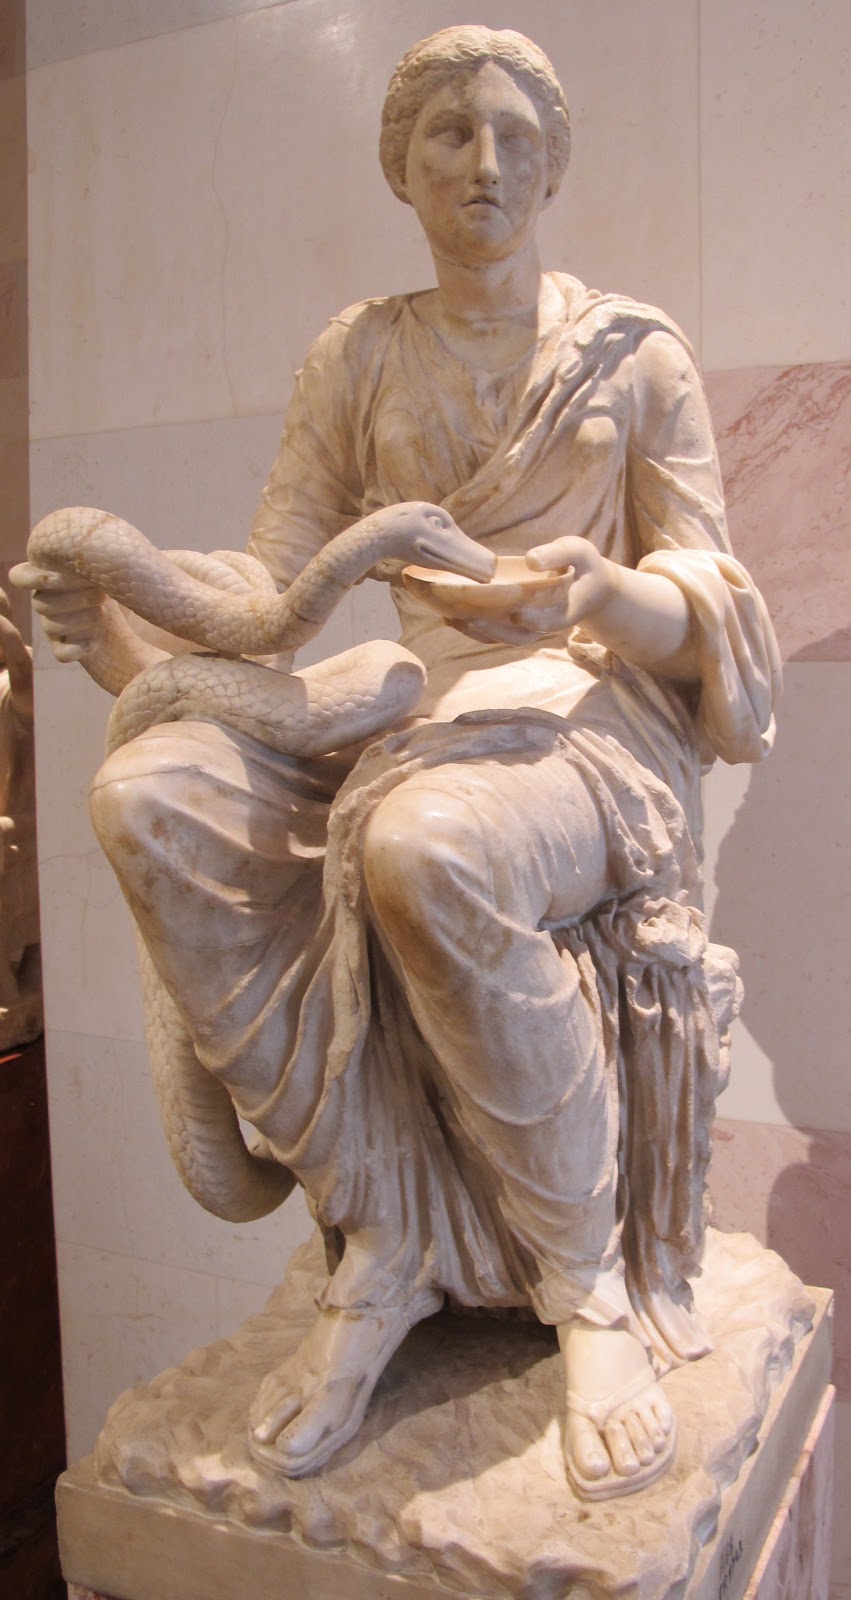 Statue of Hygeia, Roman copy of Greek original from the third century BC. Photo by Sailko, CC BY-SA 3.0